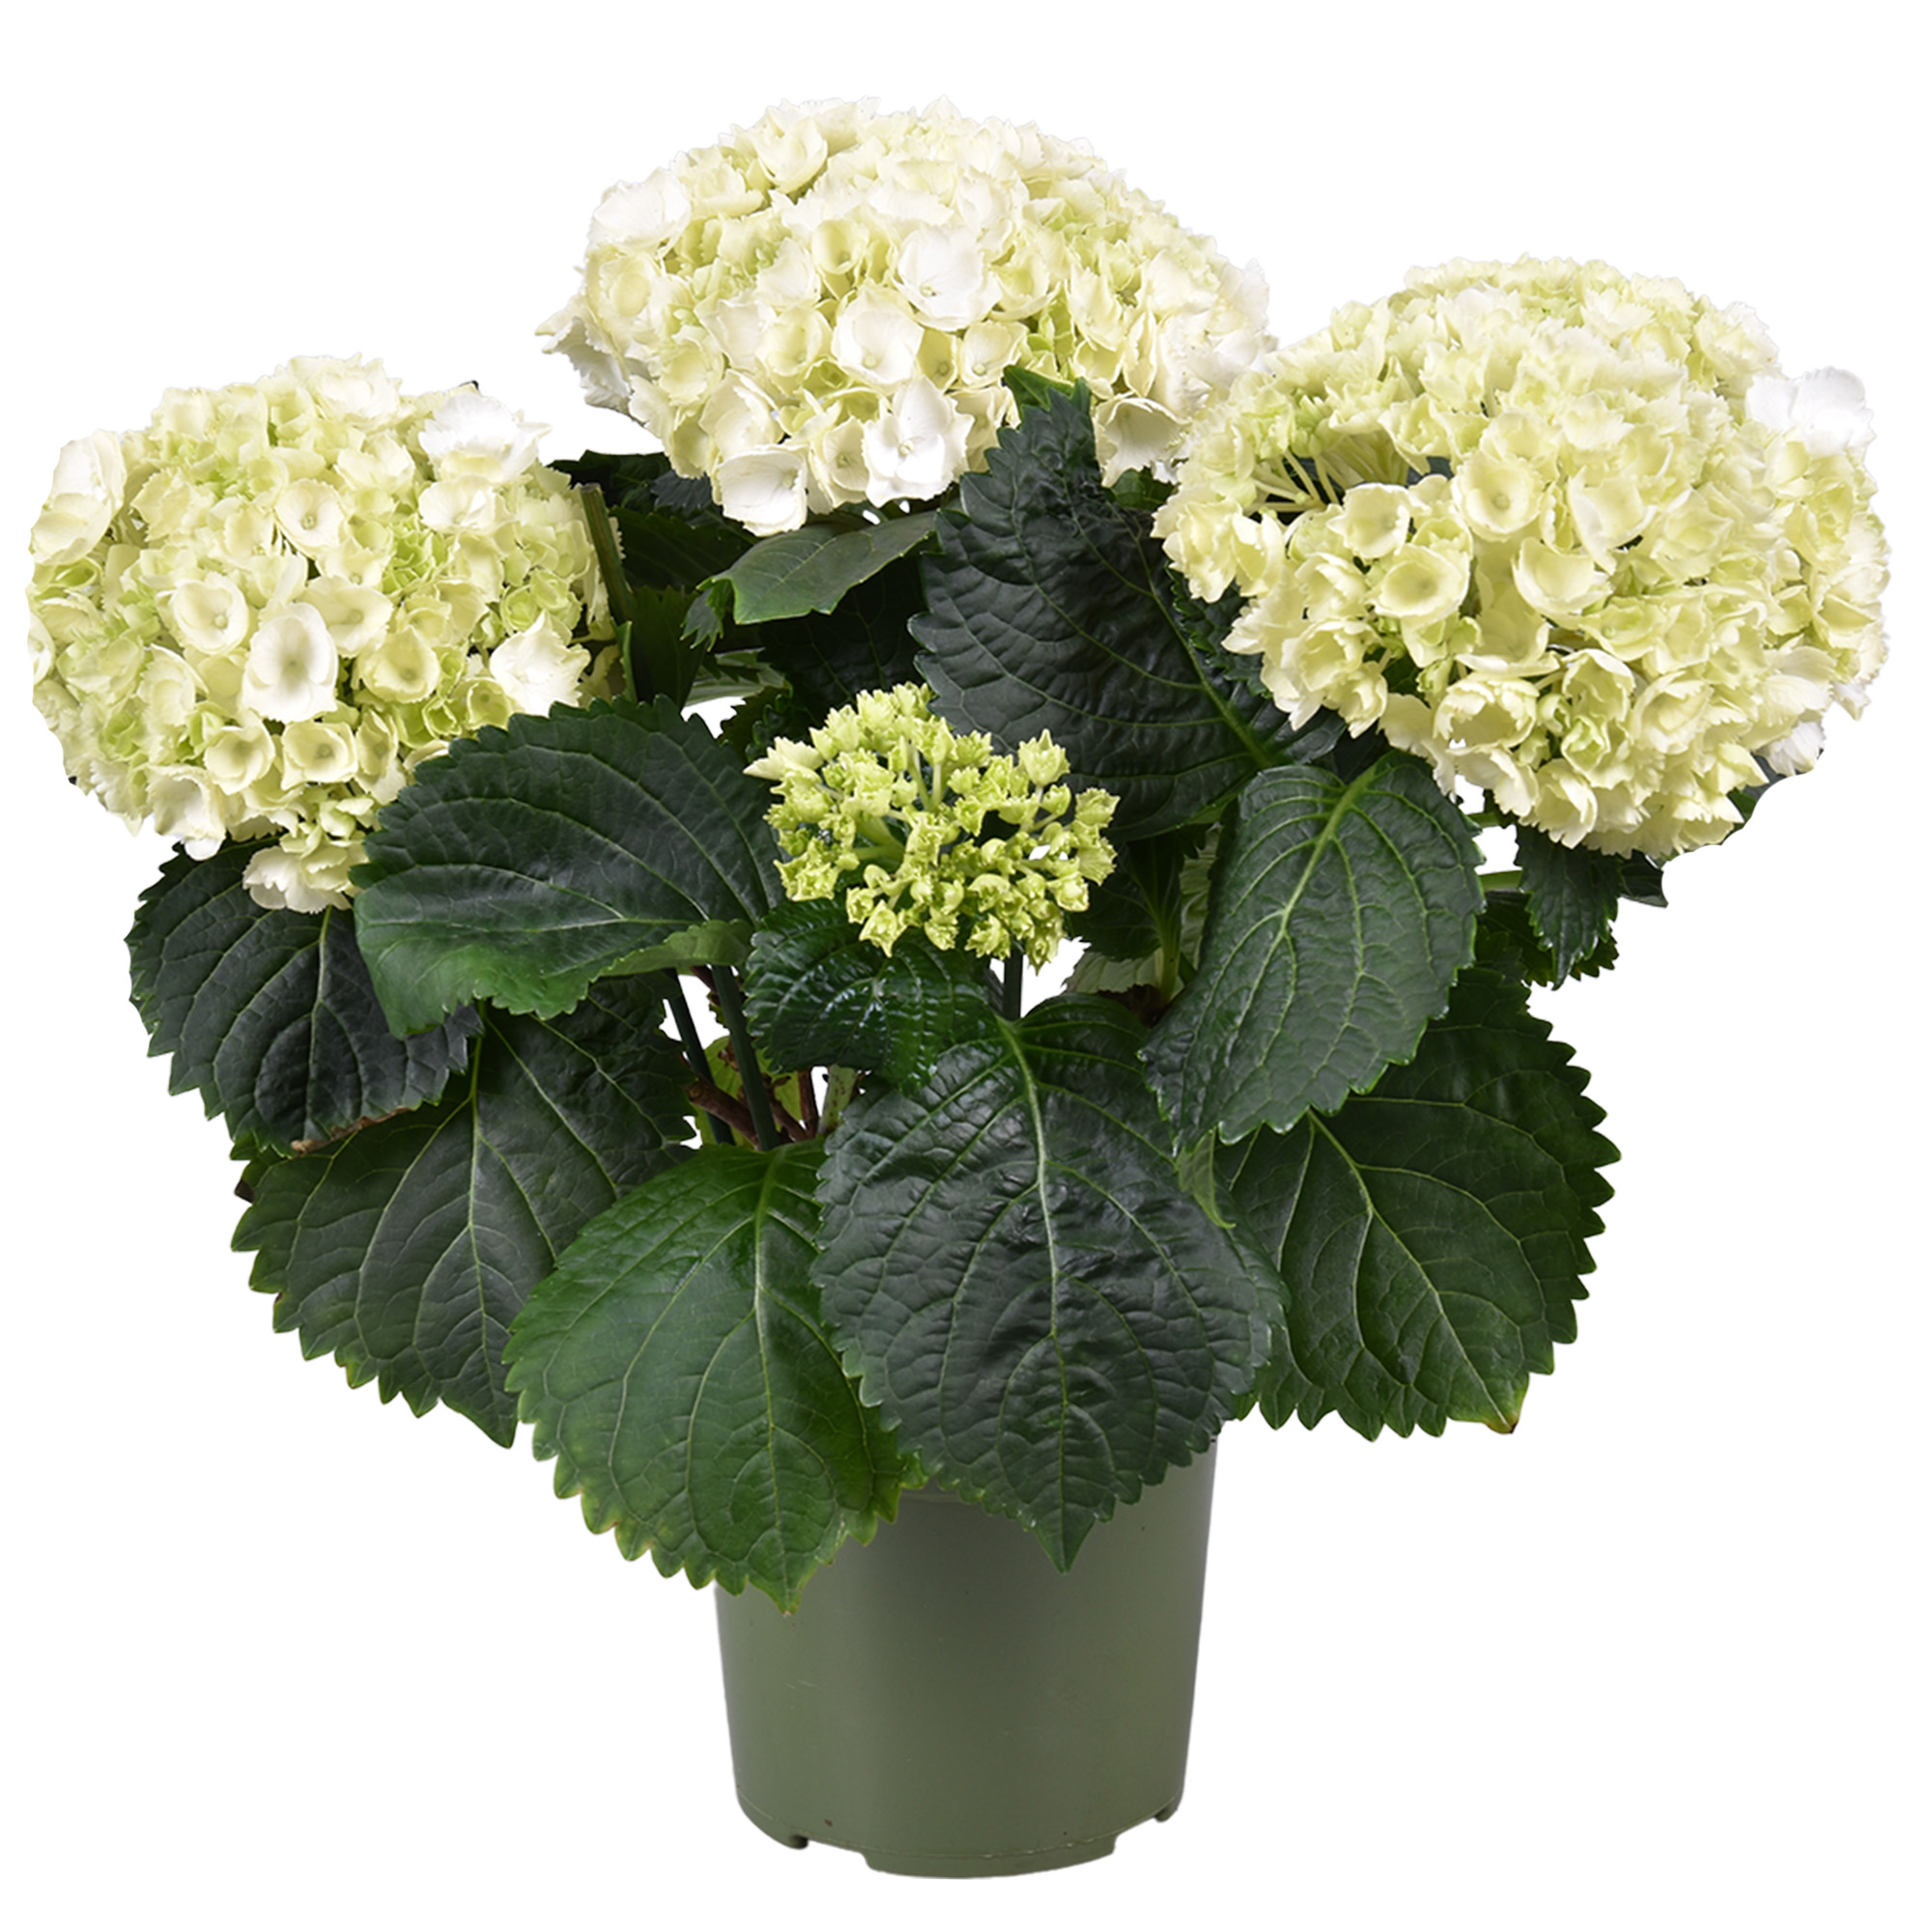 Picture of Hydrangea macrophylla wit